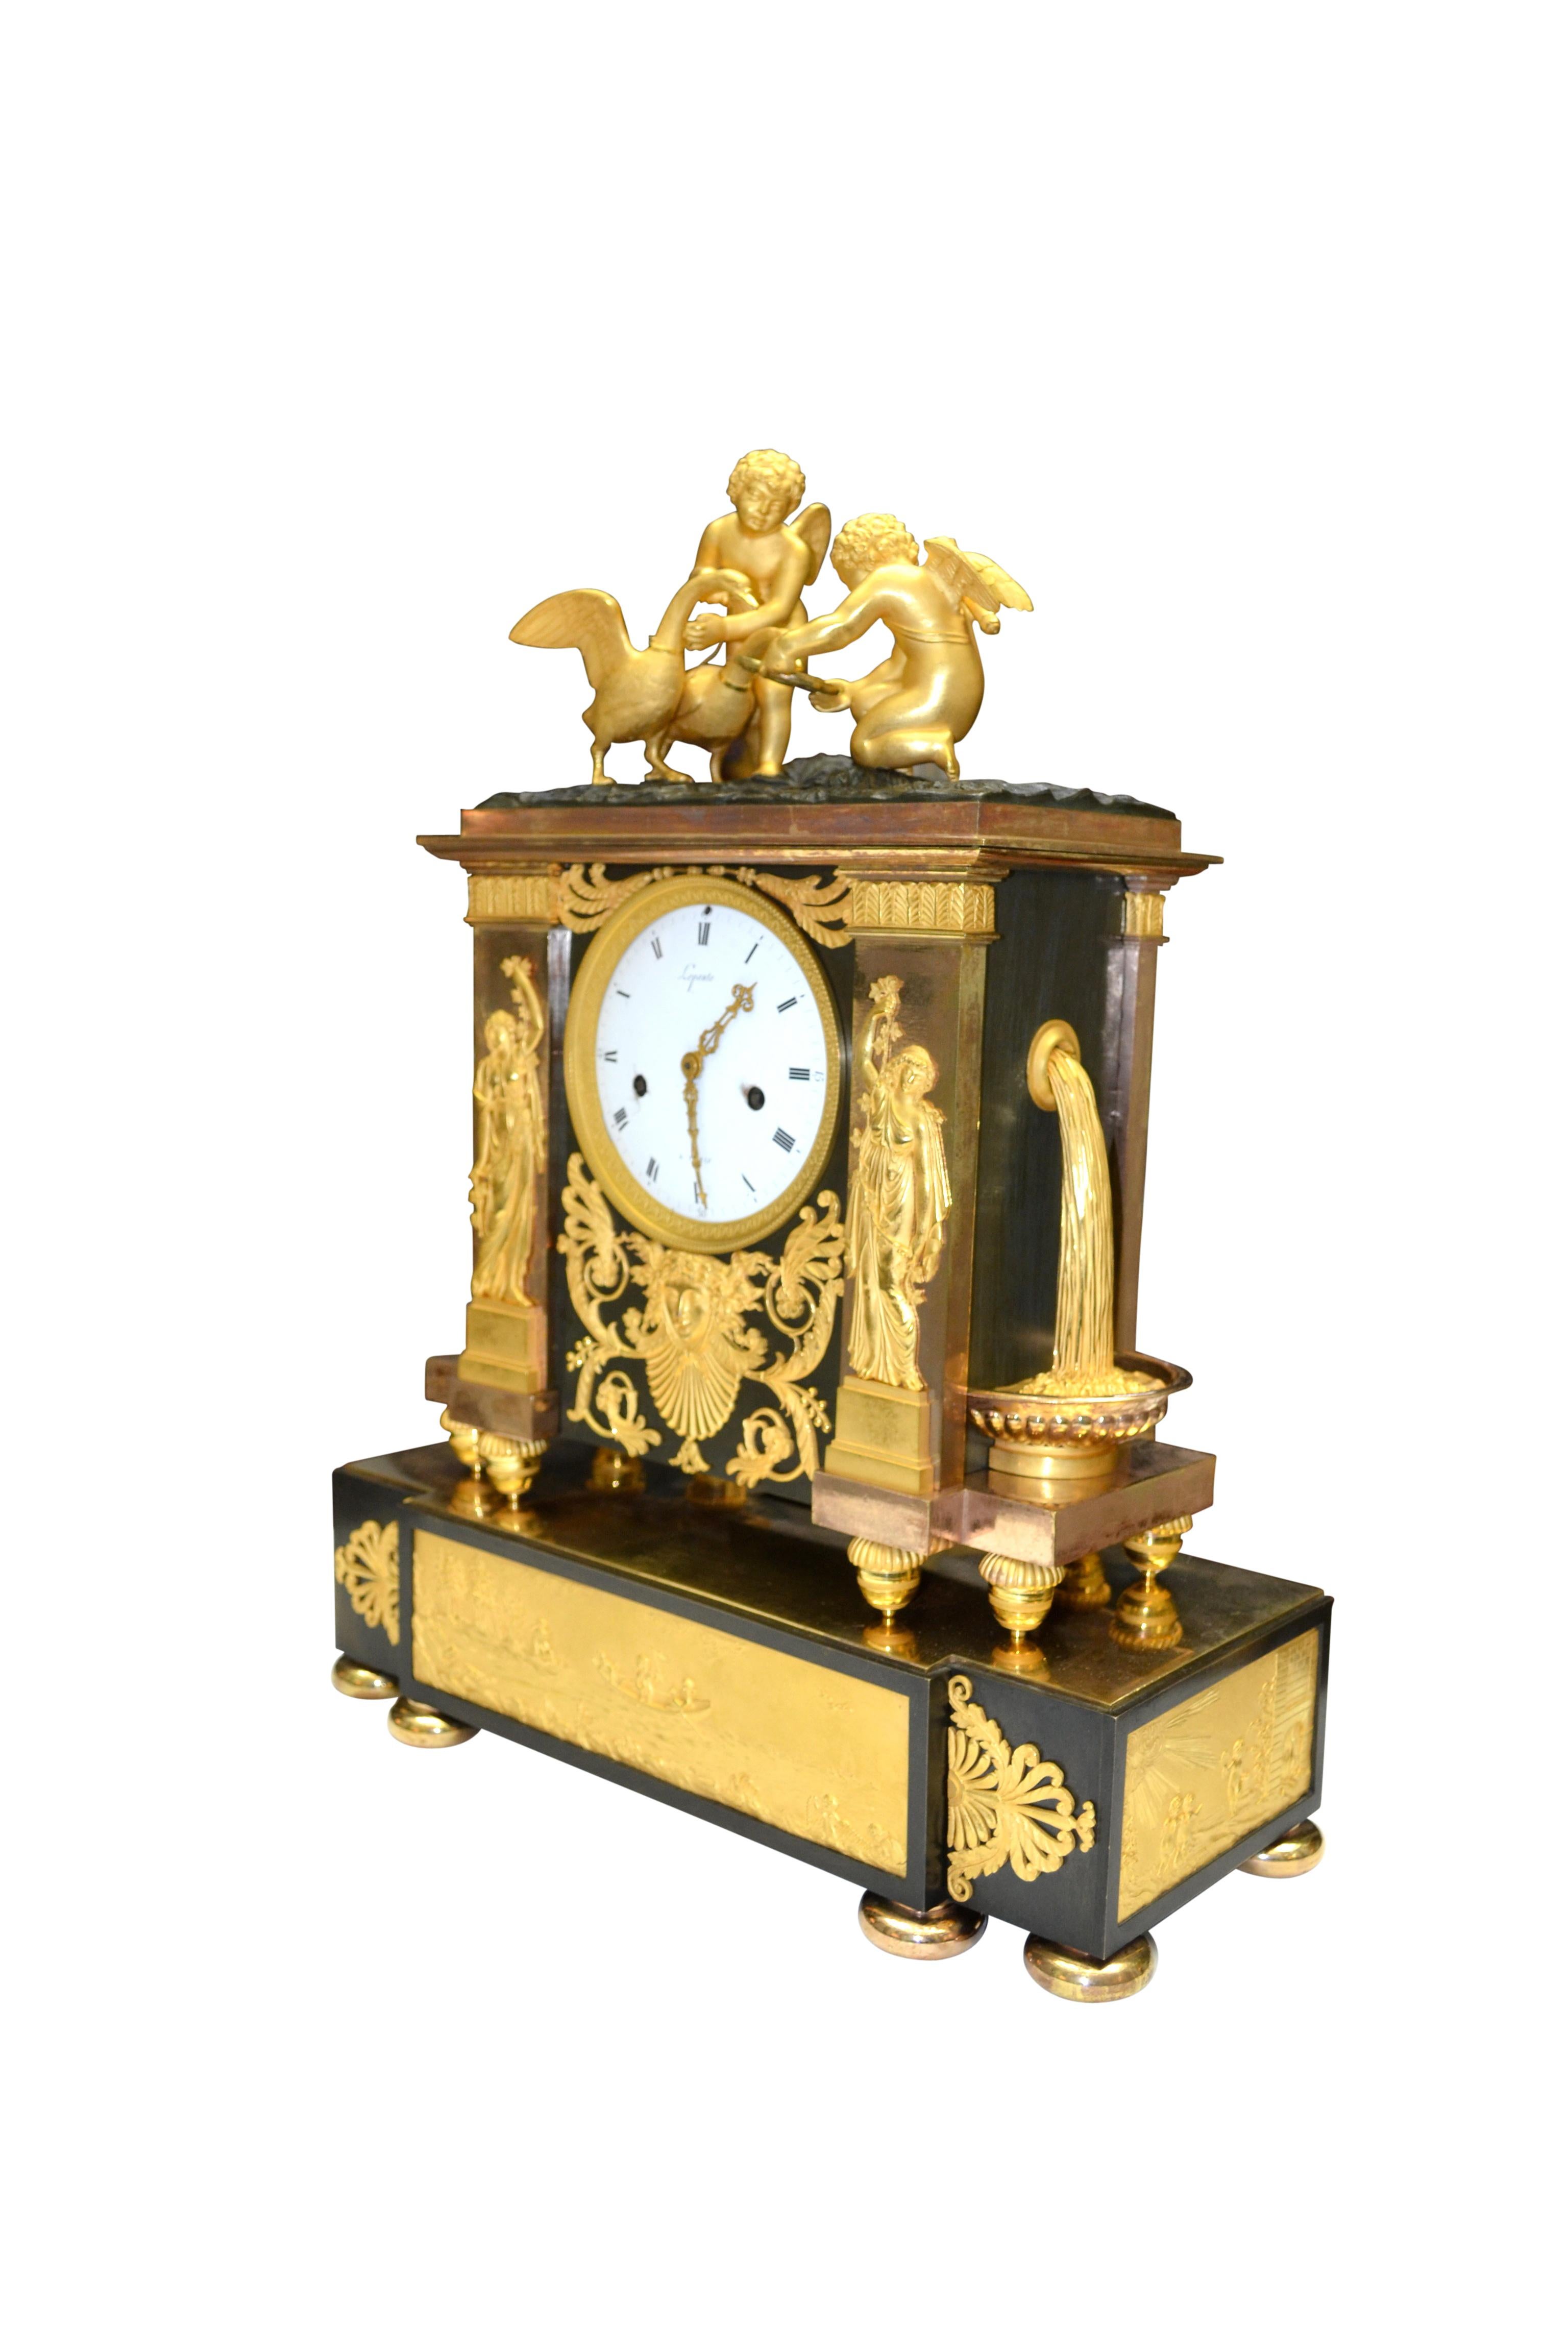 Rare French Empire Clock in Gilt and Patinated Bronze Signed Lepaute In Good Condition For Sale In Vancouver, British Columbia